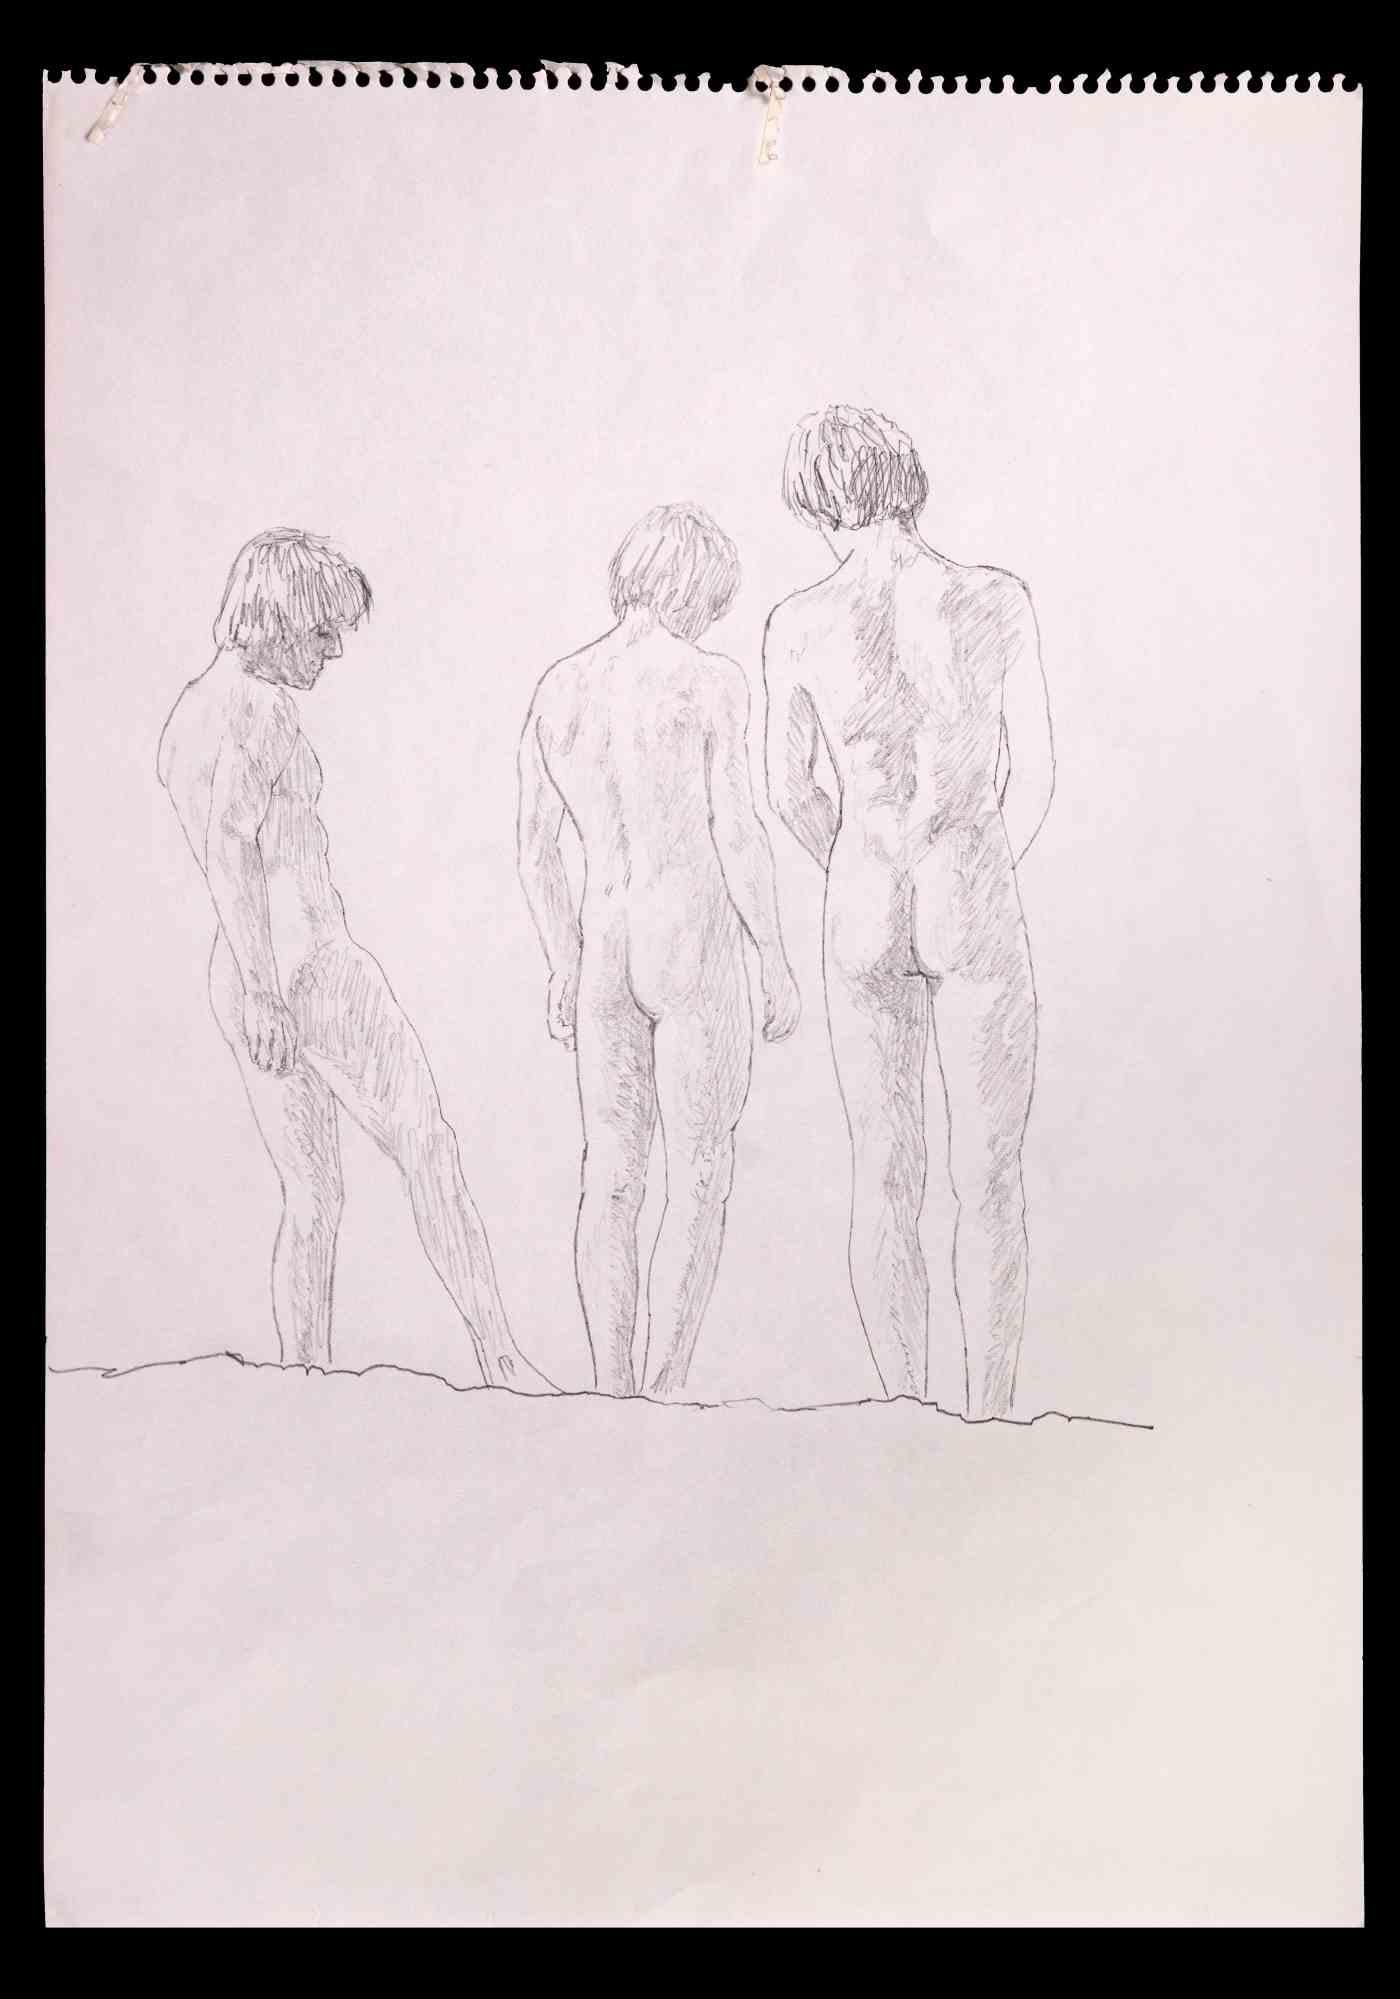 Three boys  is an original drawing on pencil realized by Anthony Roaland.

In the foreground the threefigures are depicted with a delicate and harmonious style.

Good conditions.
